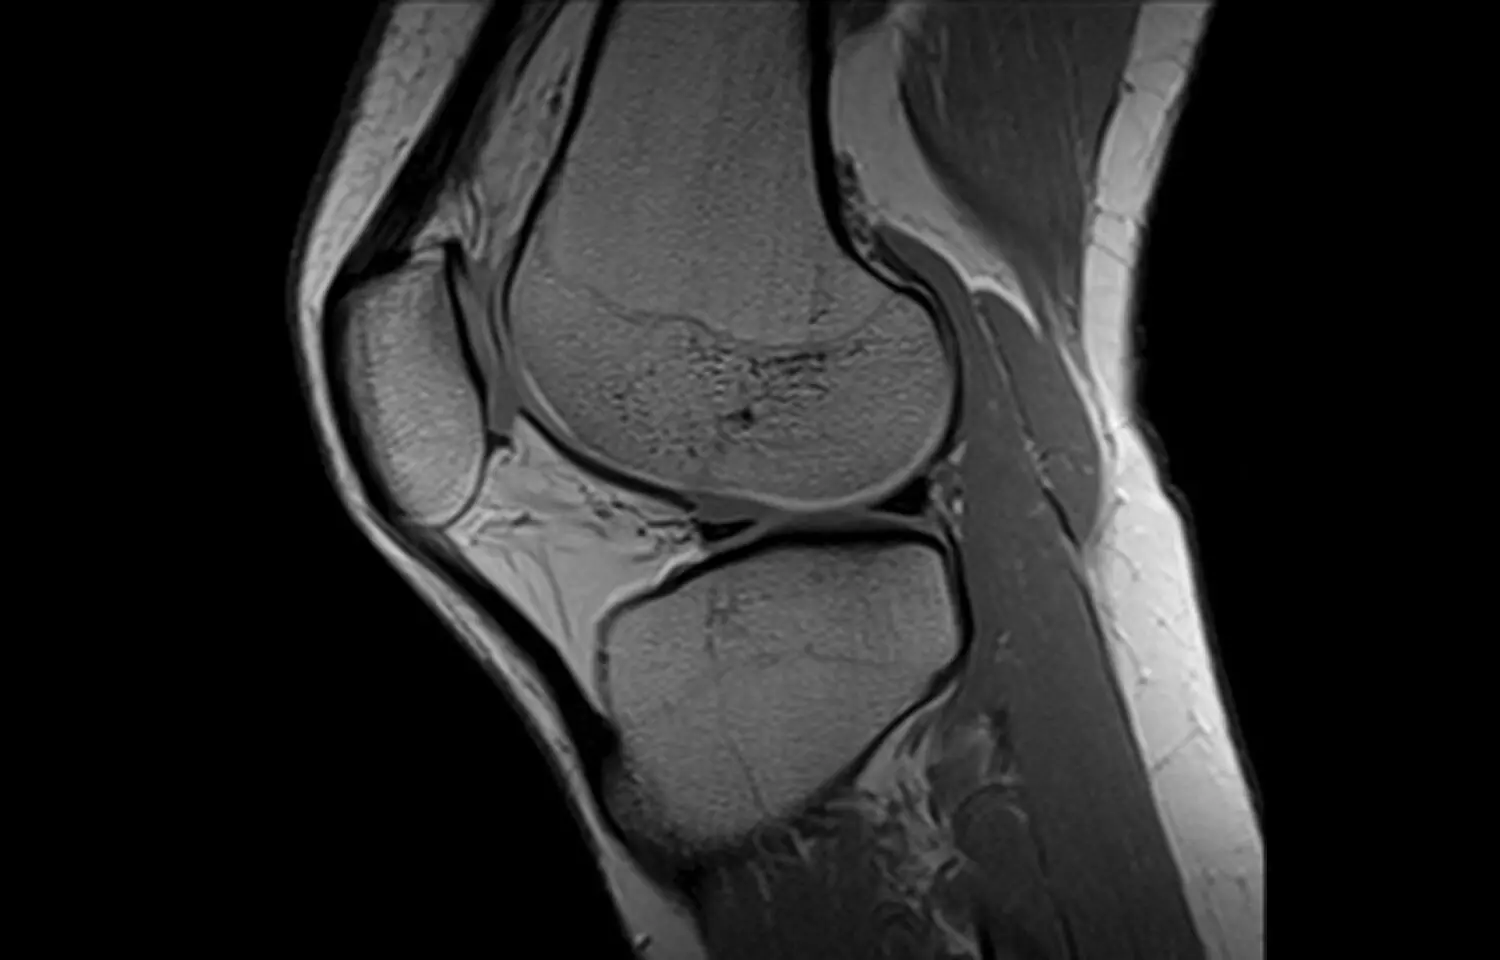 5-minute knee MRI performs equally well as 10-minute protocol: Study